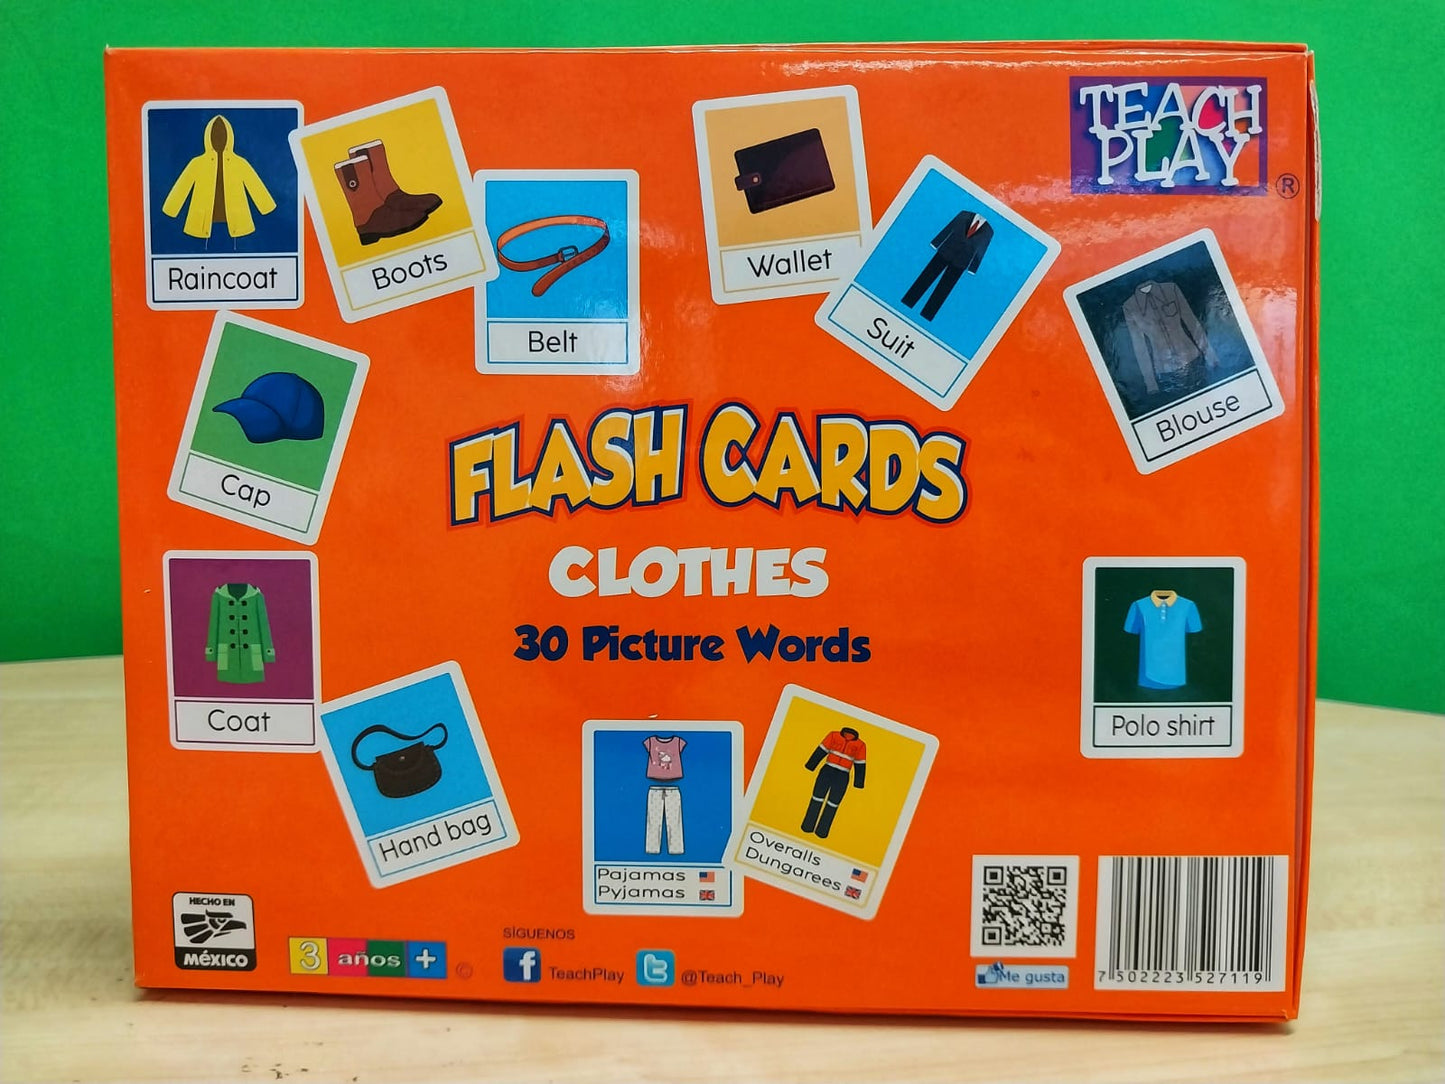 FLASH CARDS CLOTHES